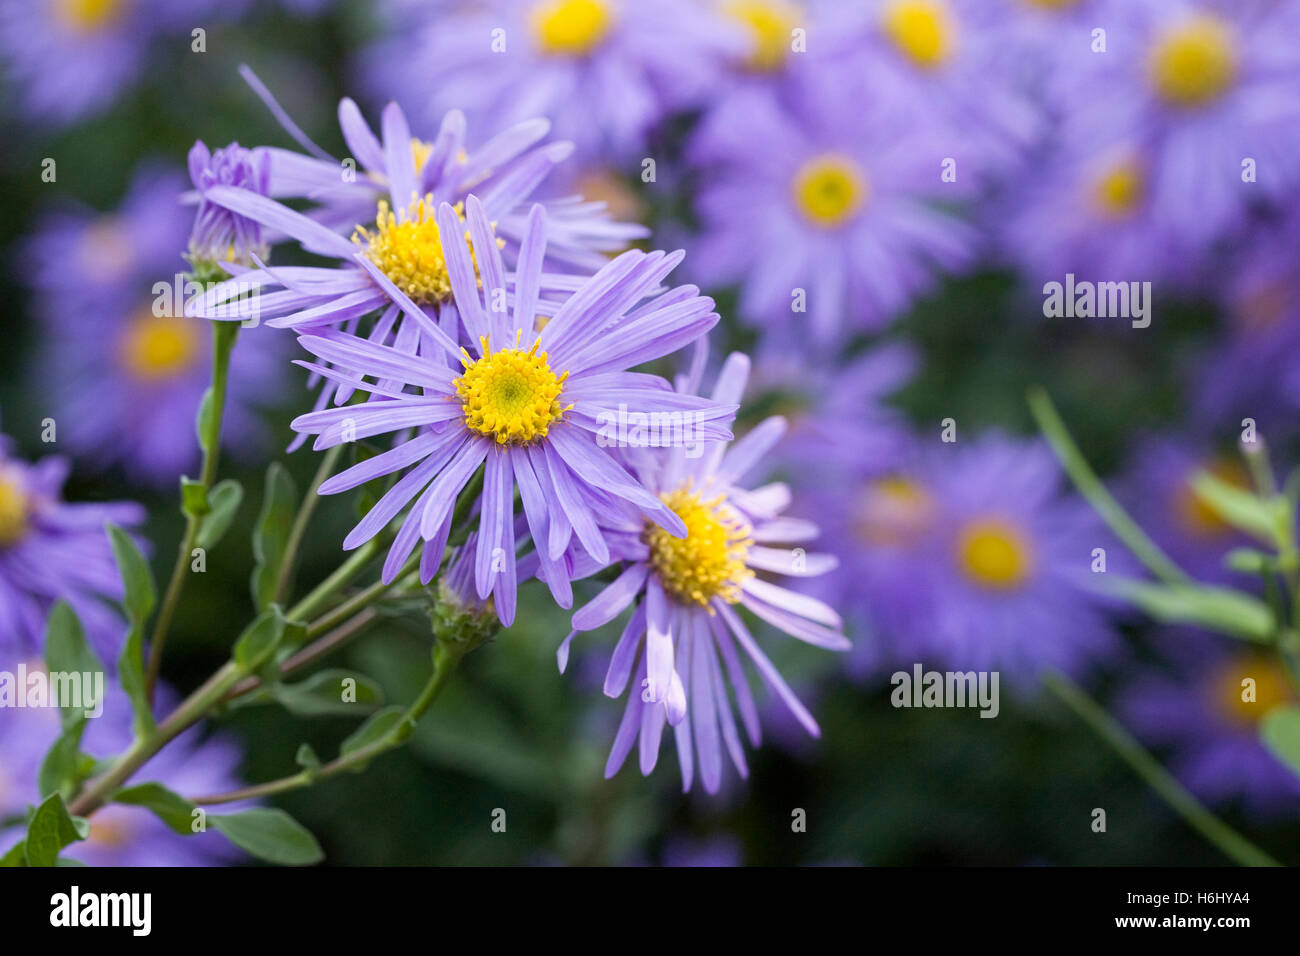 Aster amelius 'King George' flowers. Stock Photo